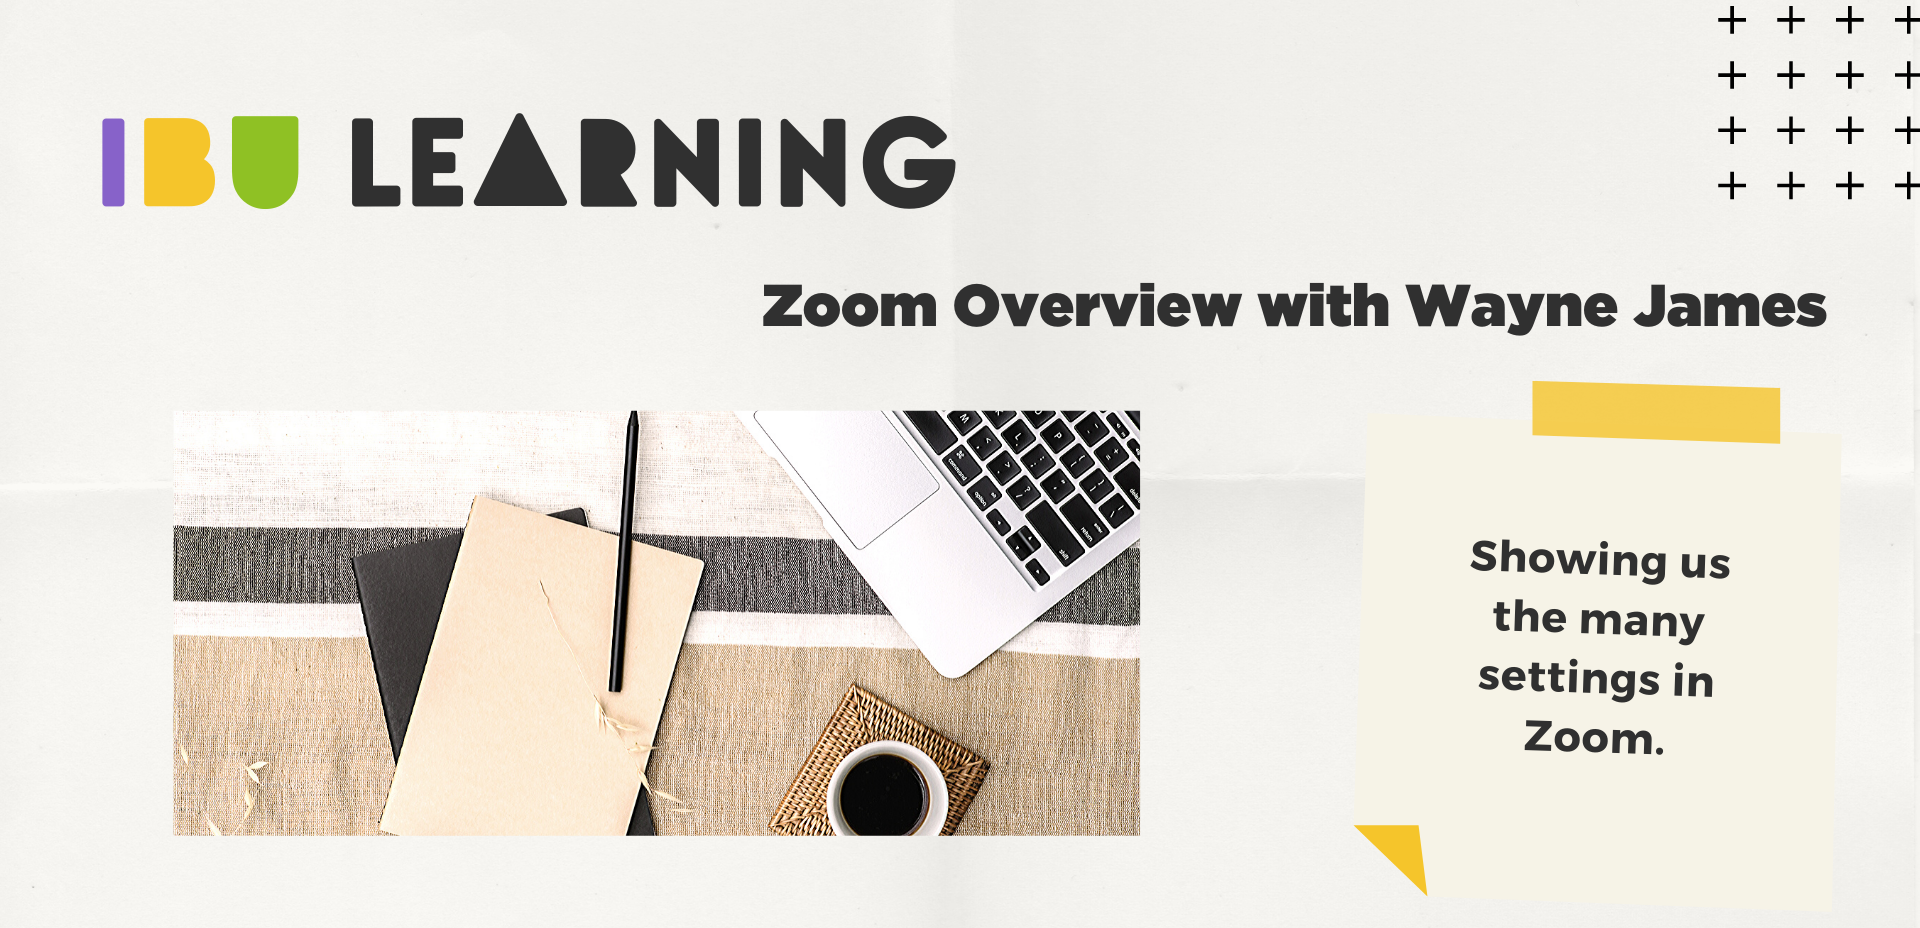 IBU Learning - A Zoom Overview with Wayne James